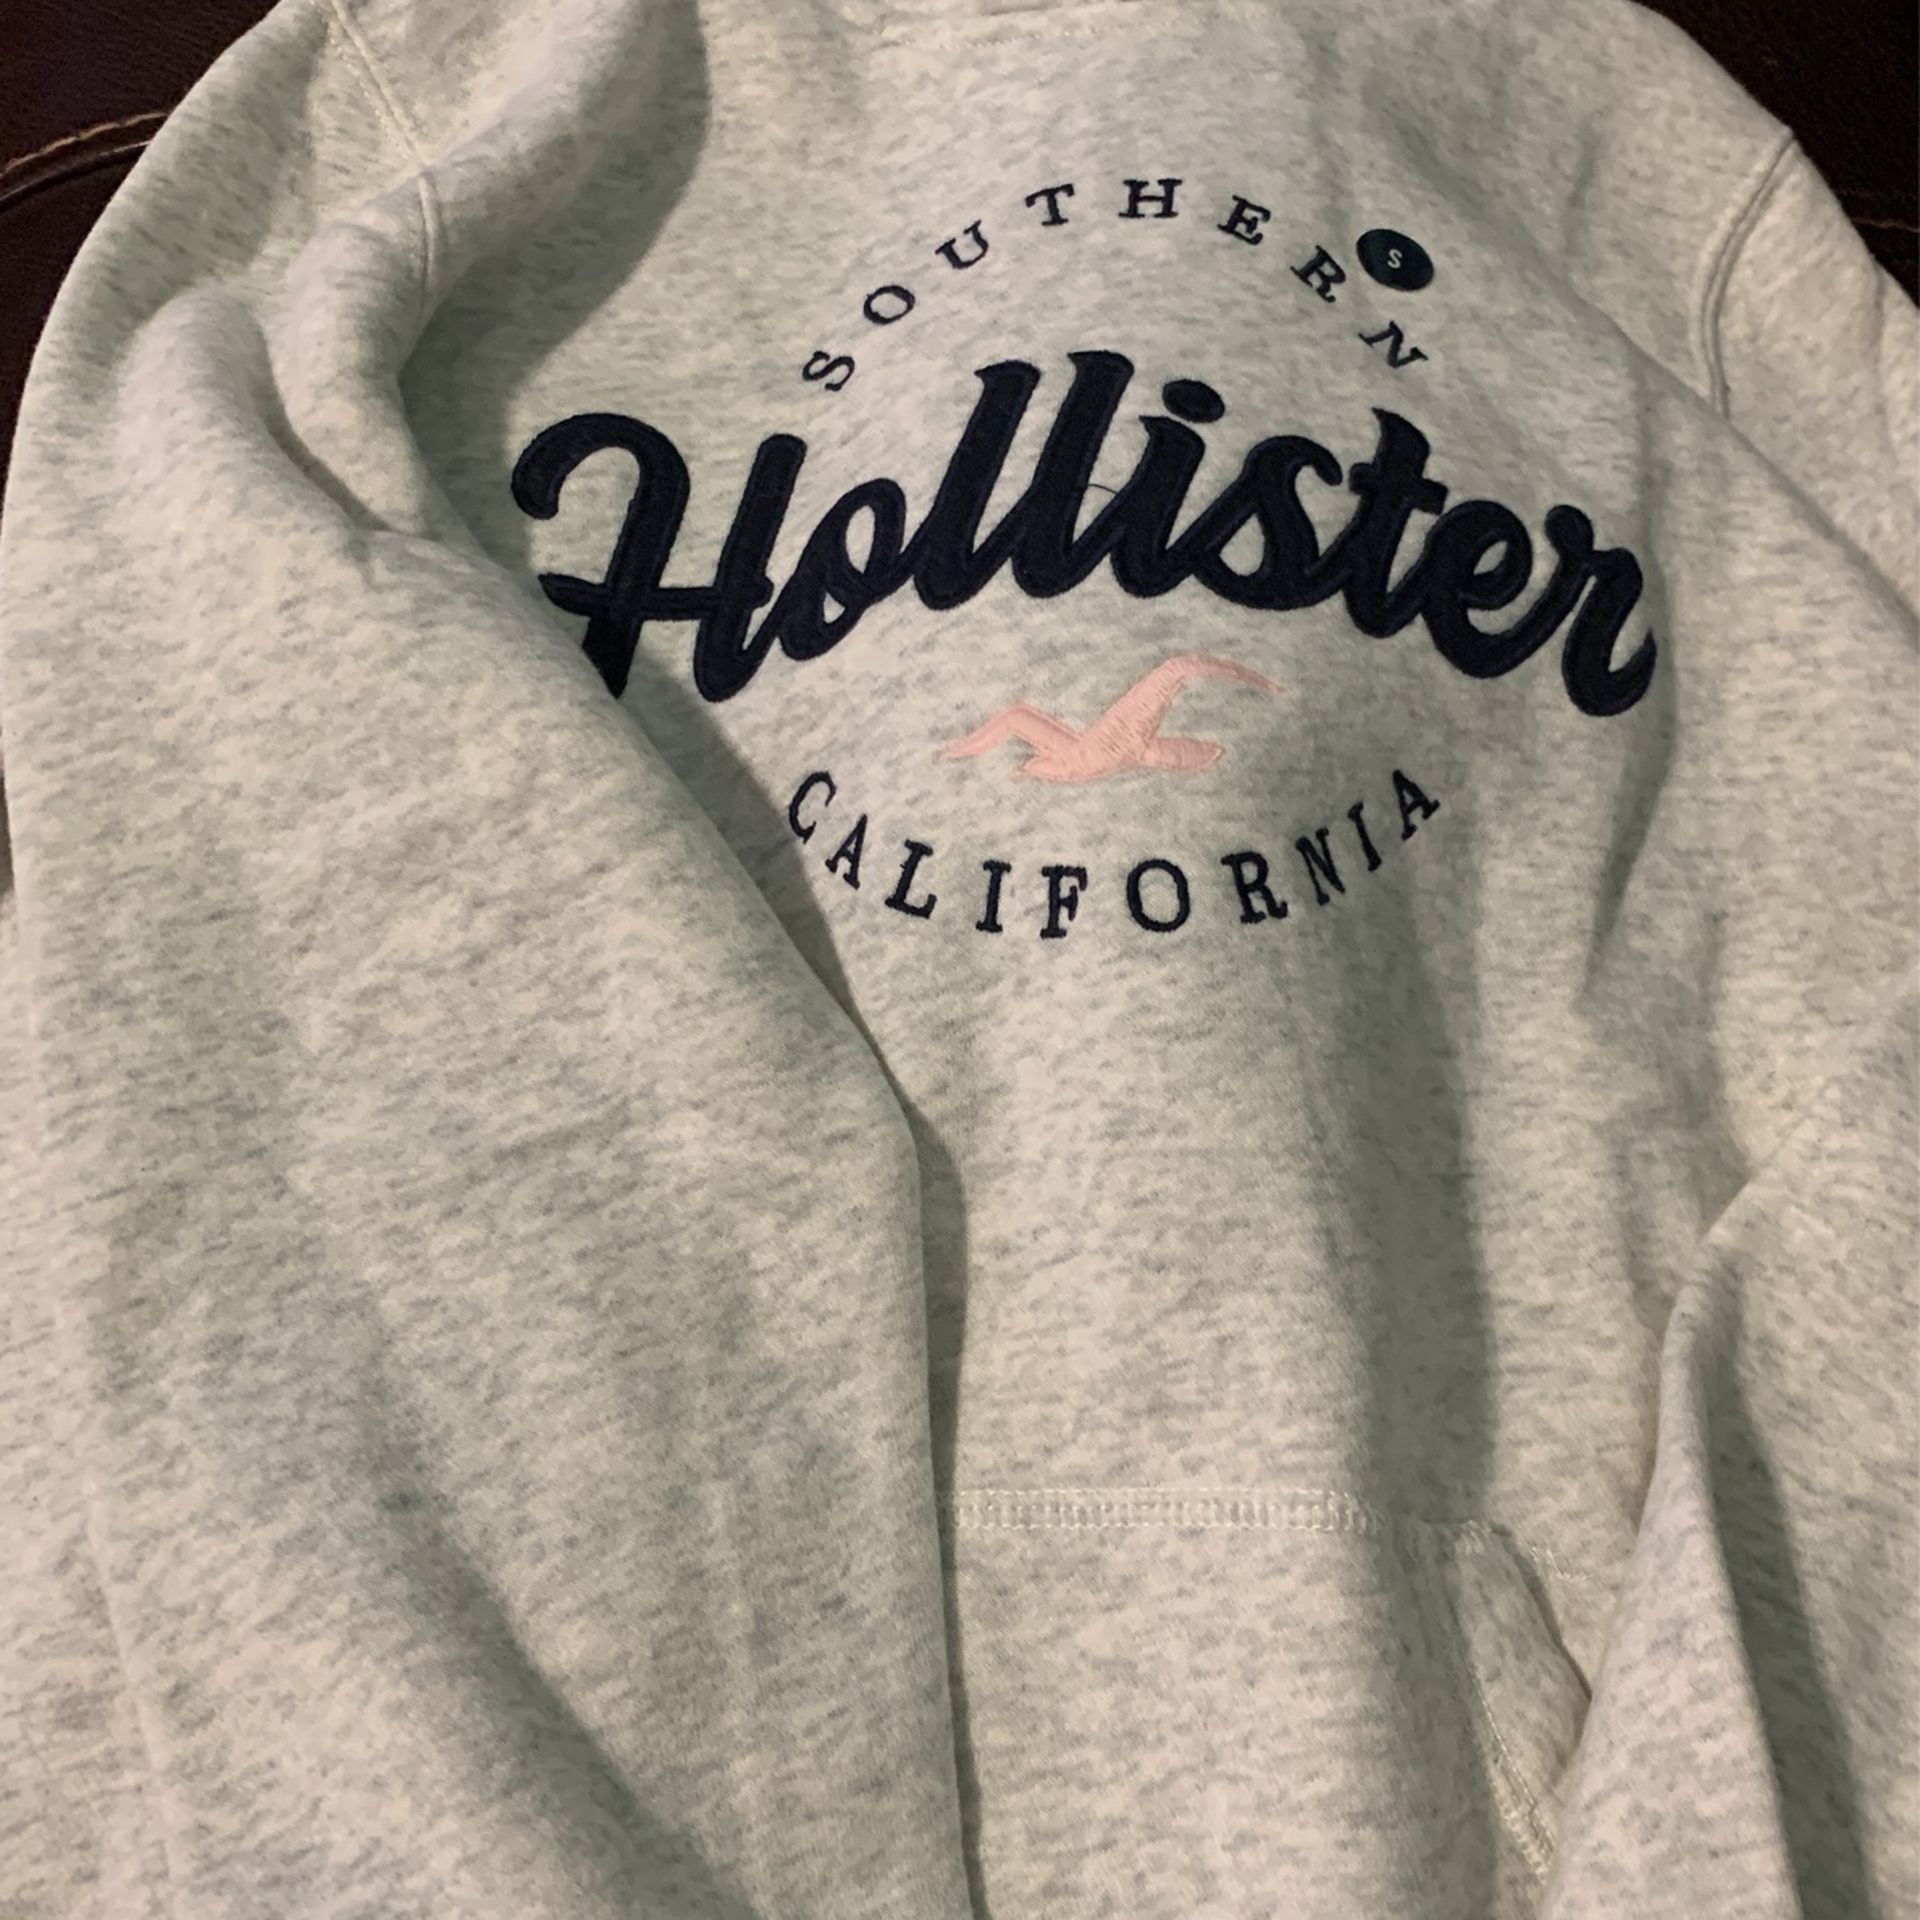 hollister hoodie for women brand new